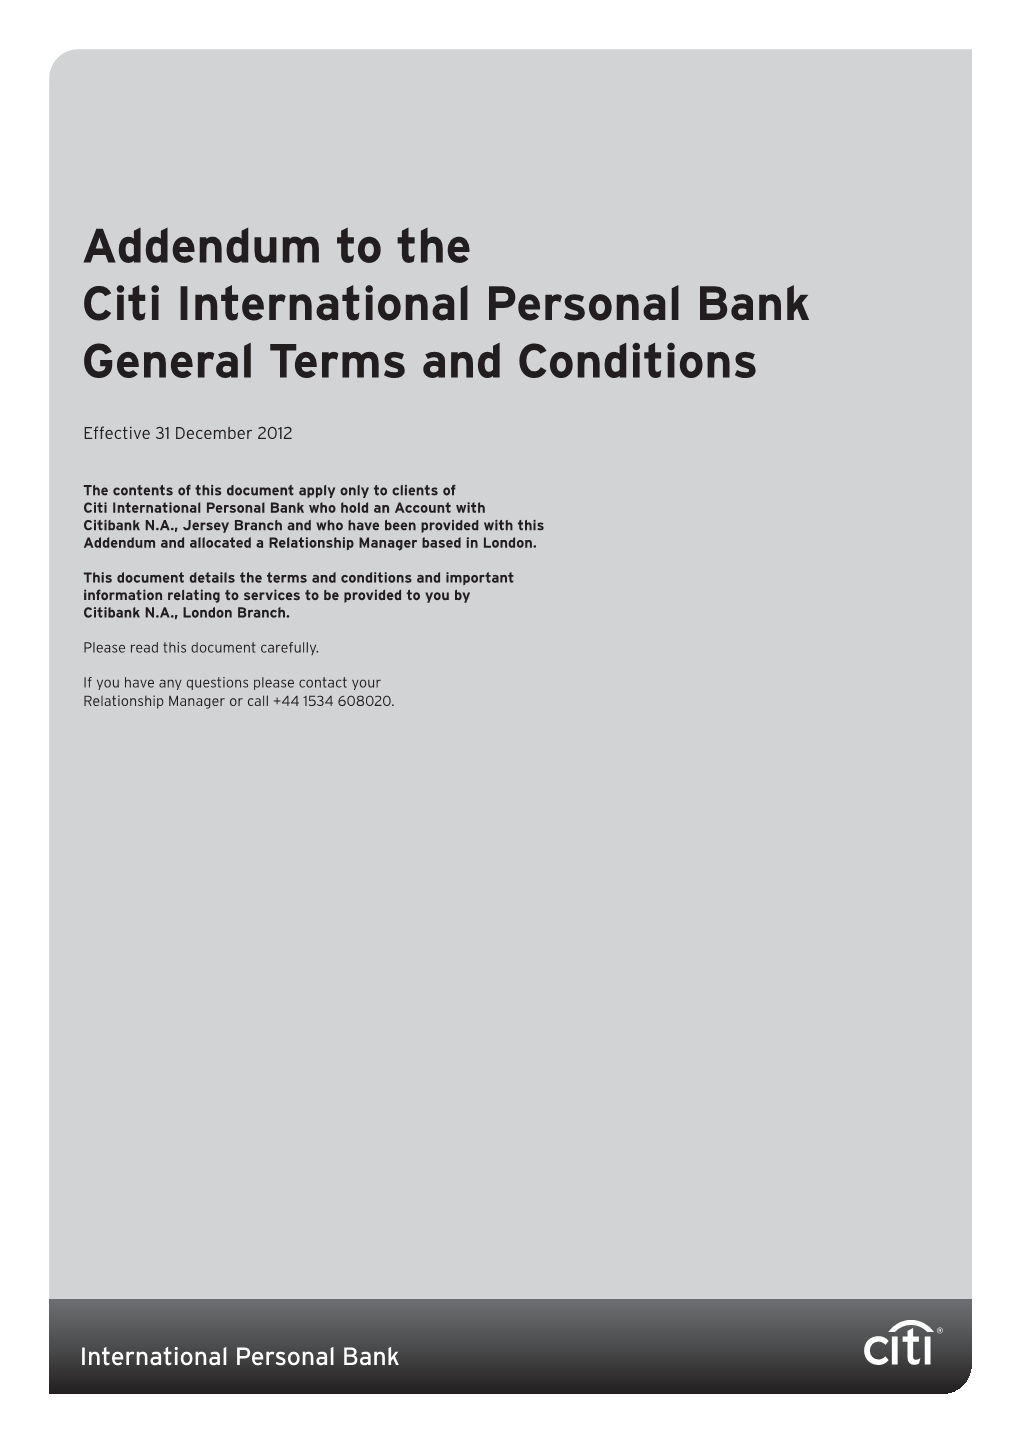 Addendum to the Citi International Personal Bank General Terms and Conditions